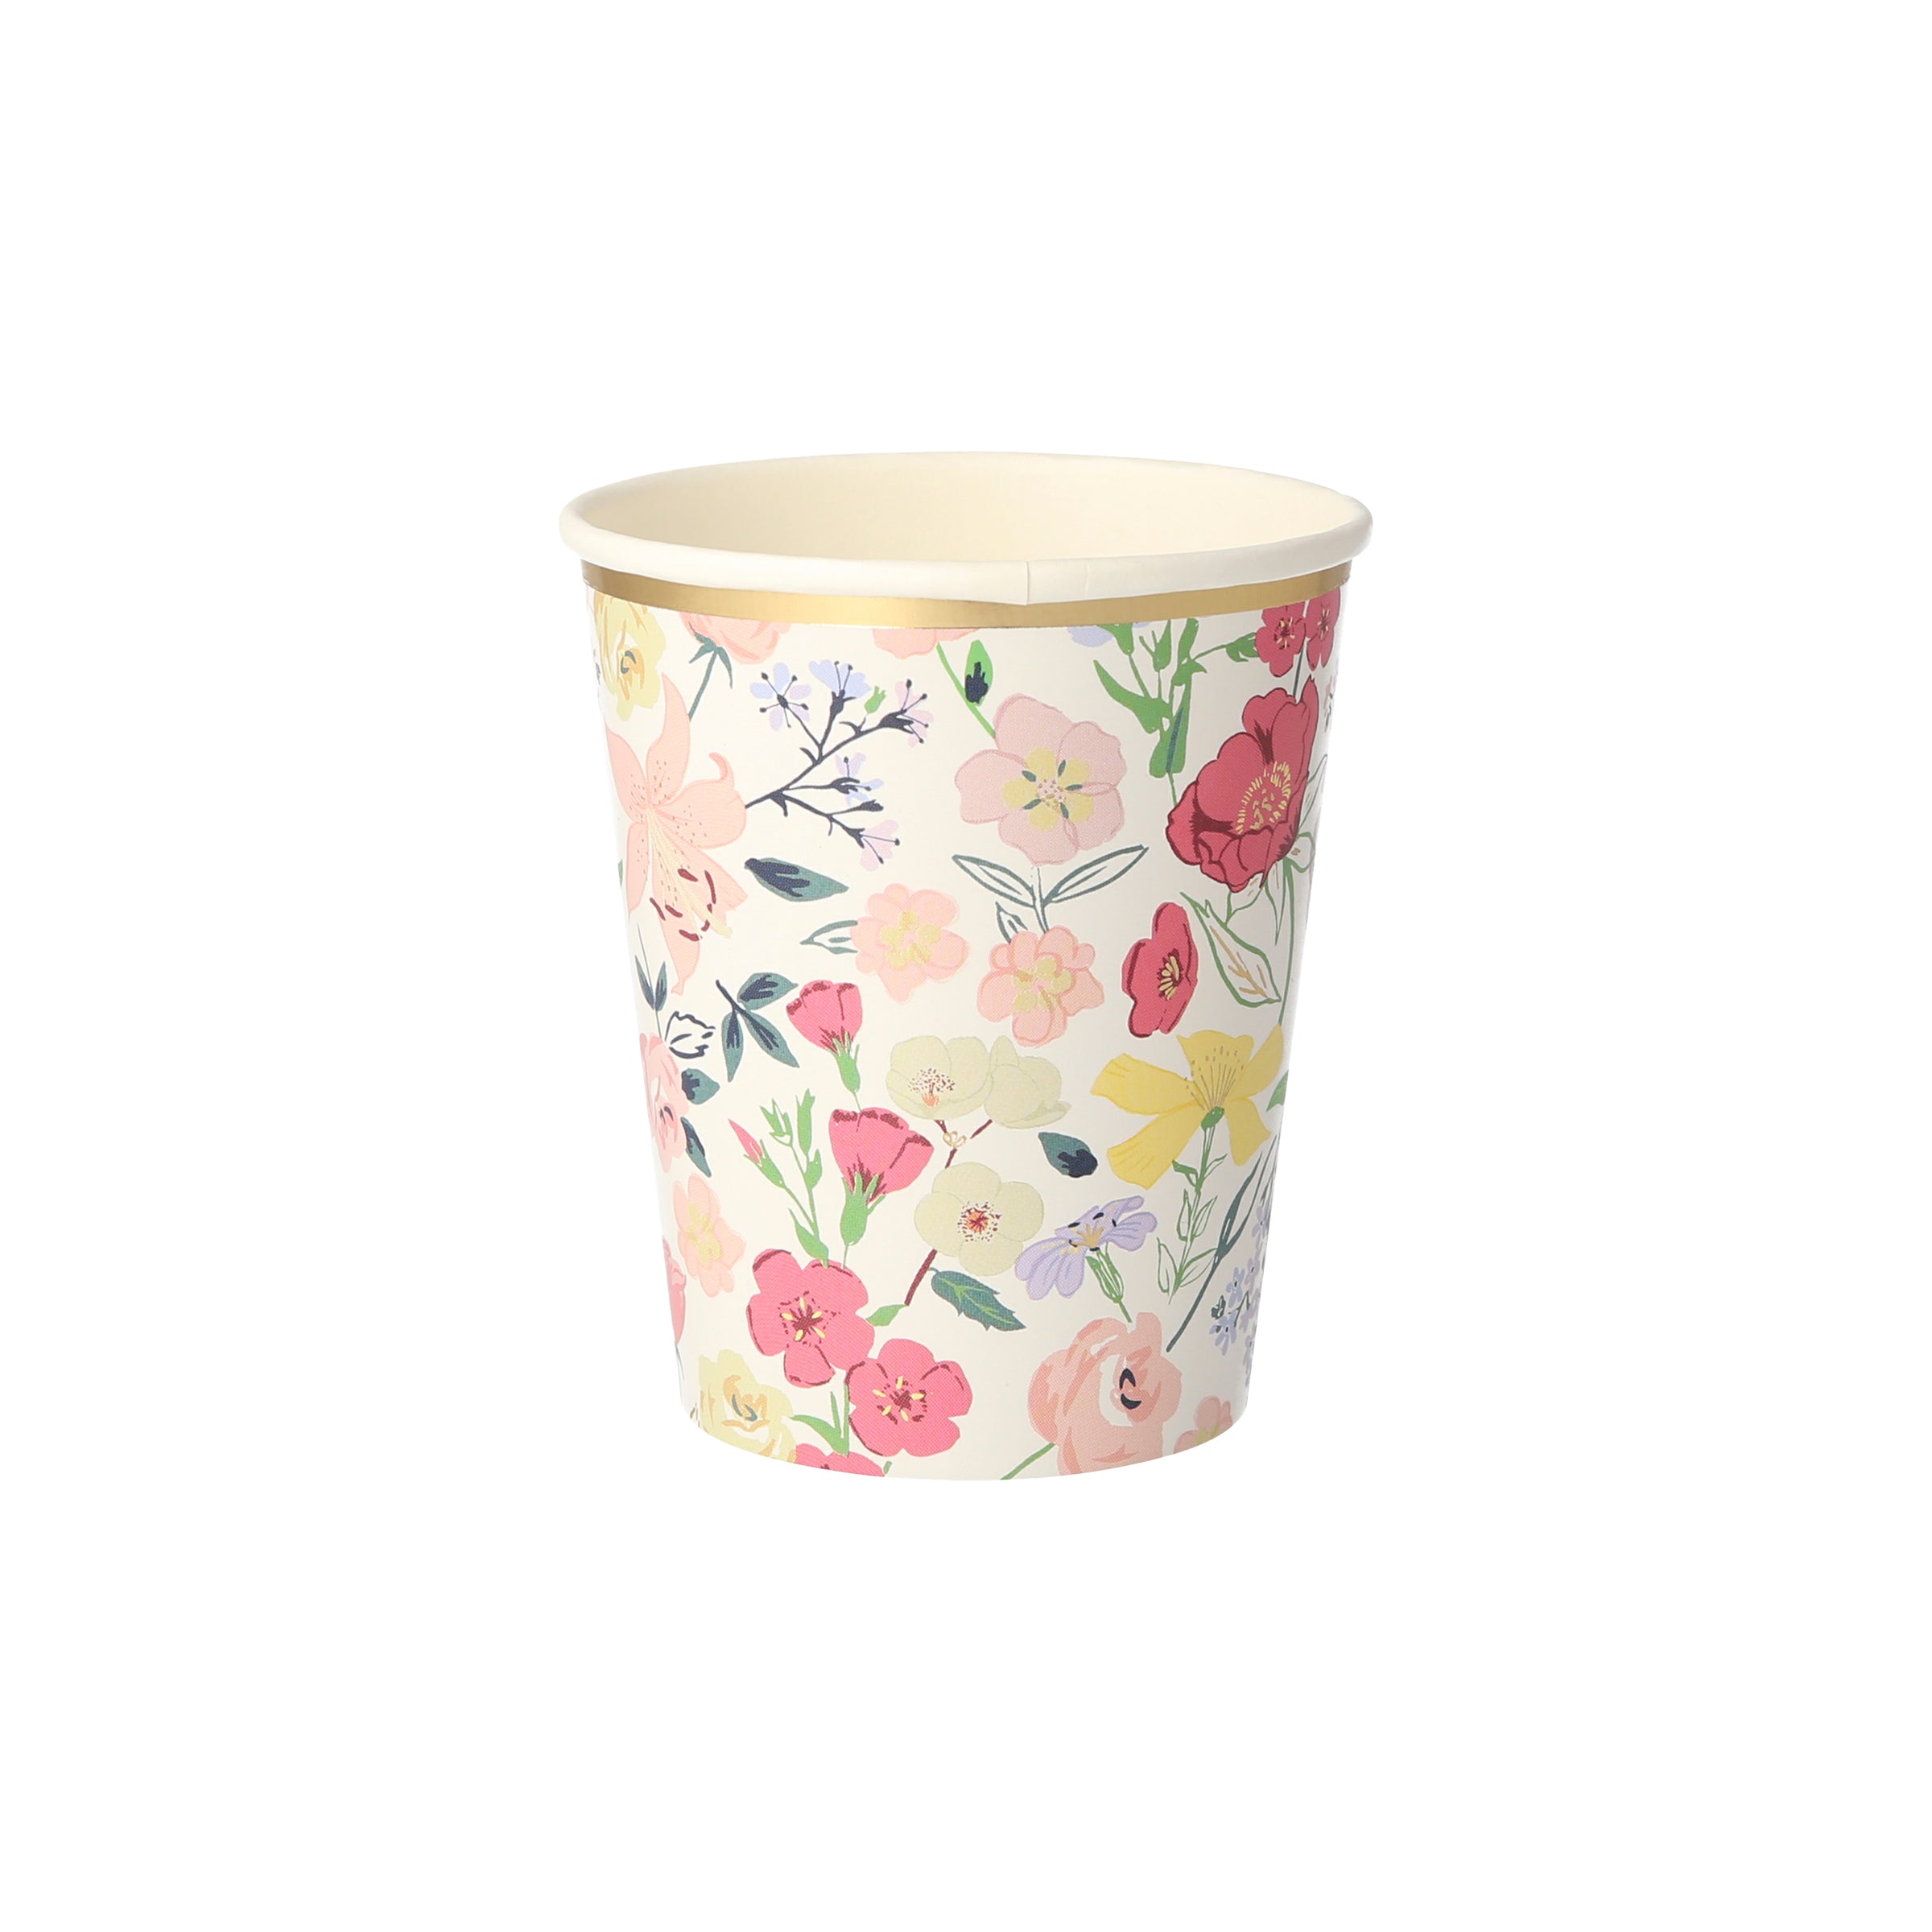 Our party cups, with elegant flowers, are ideal for a flower party, garden party, picnic or to add to wedding party supplies.